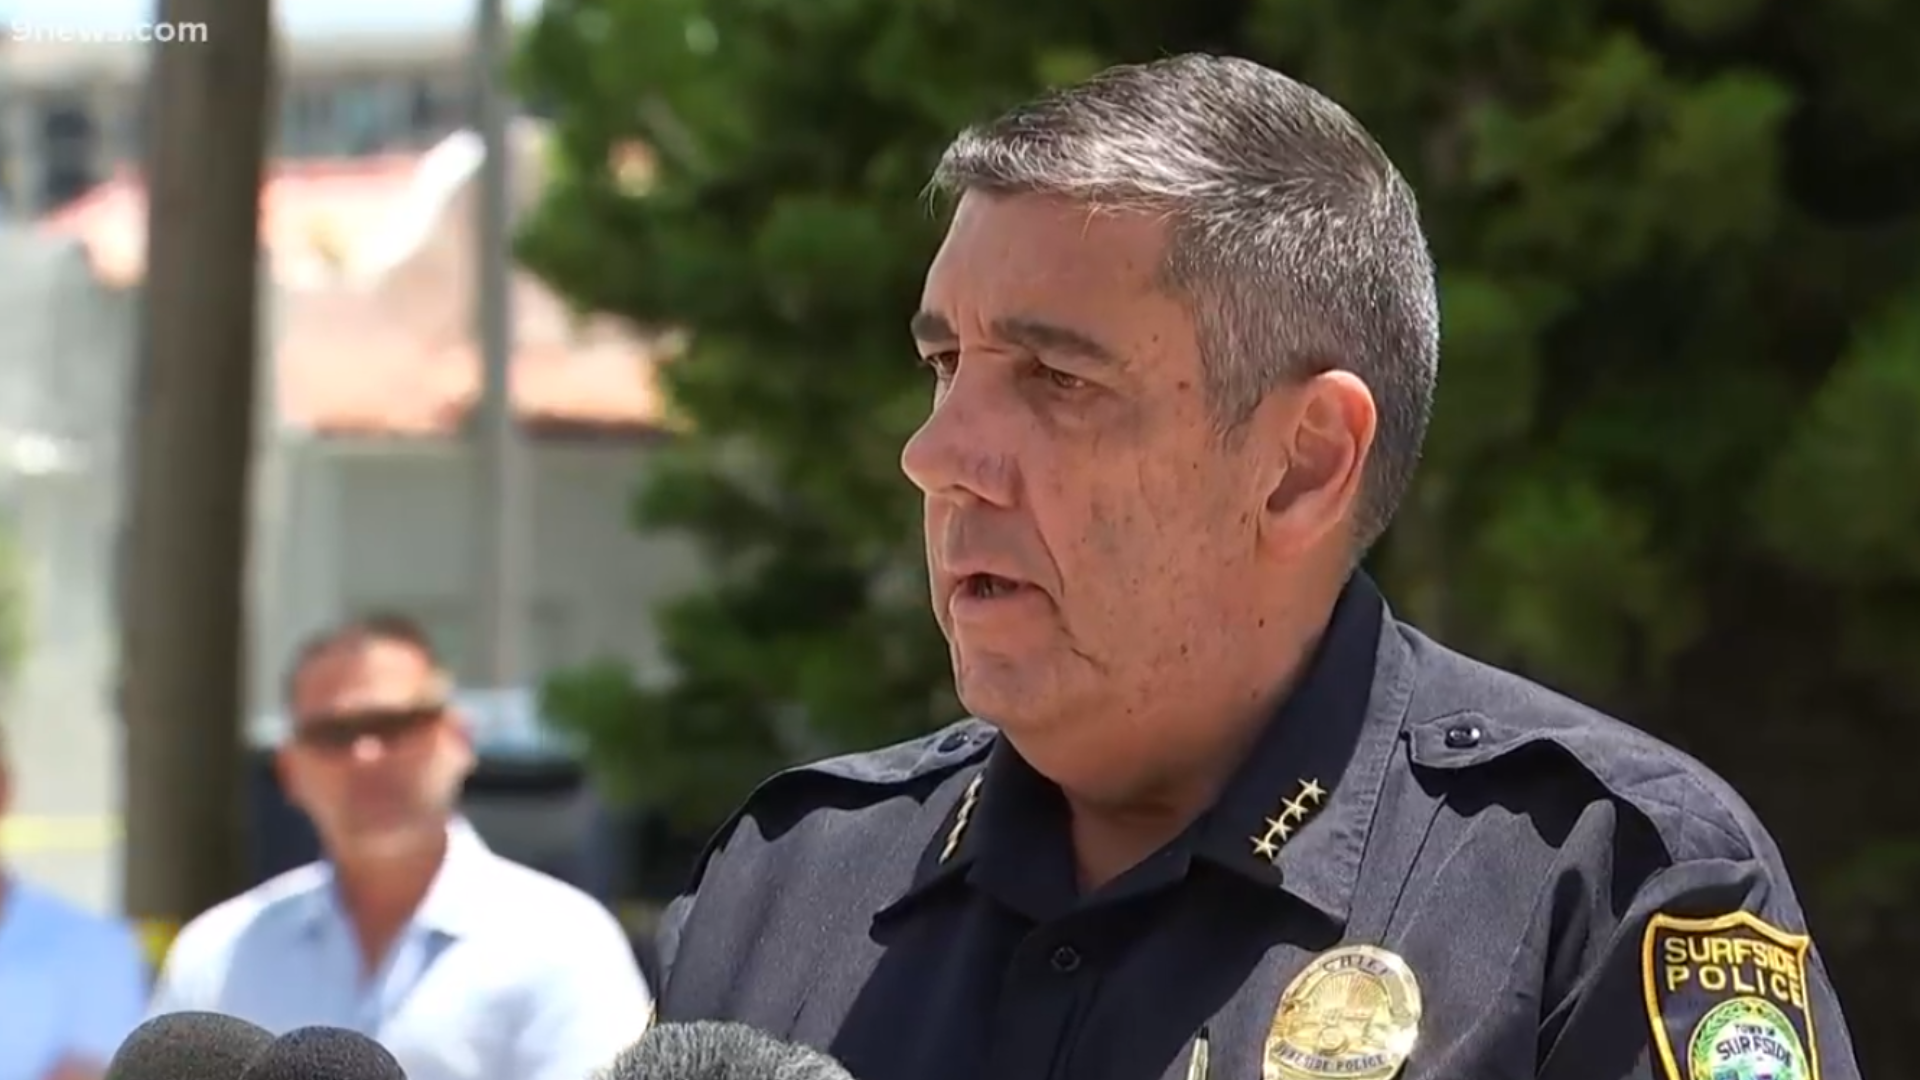 "The collaboration probably prevented a tragedy in this situation," said Surfside Chief of Police Julio Yero. "This family contributed greatly to this investigation from the very onset."